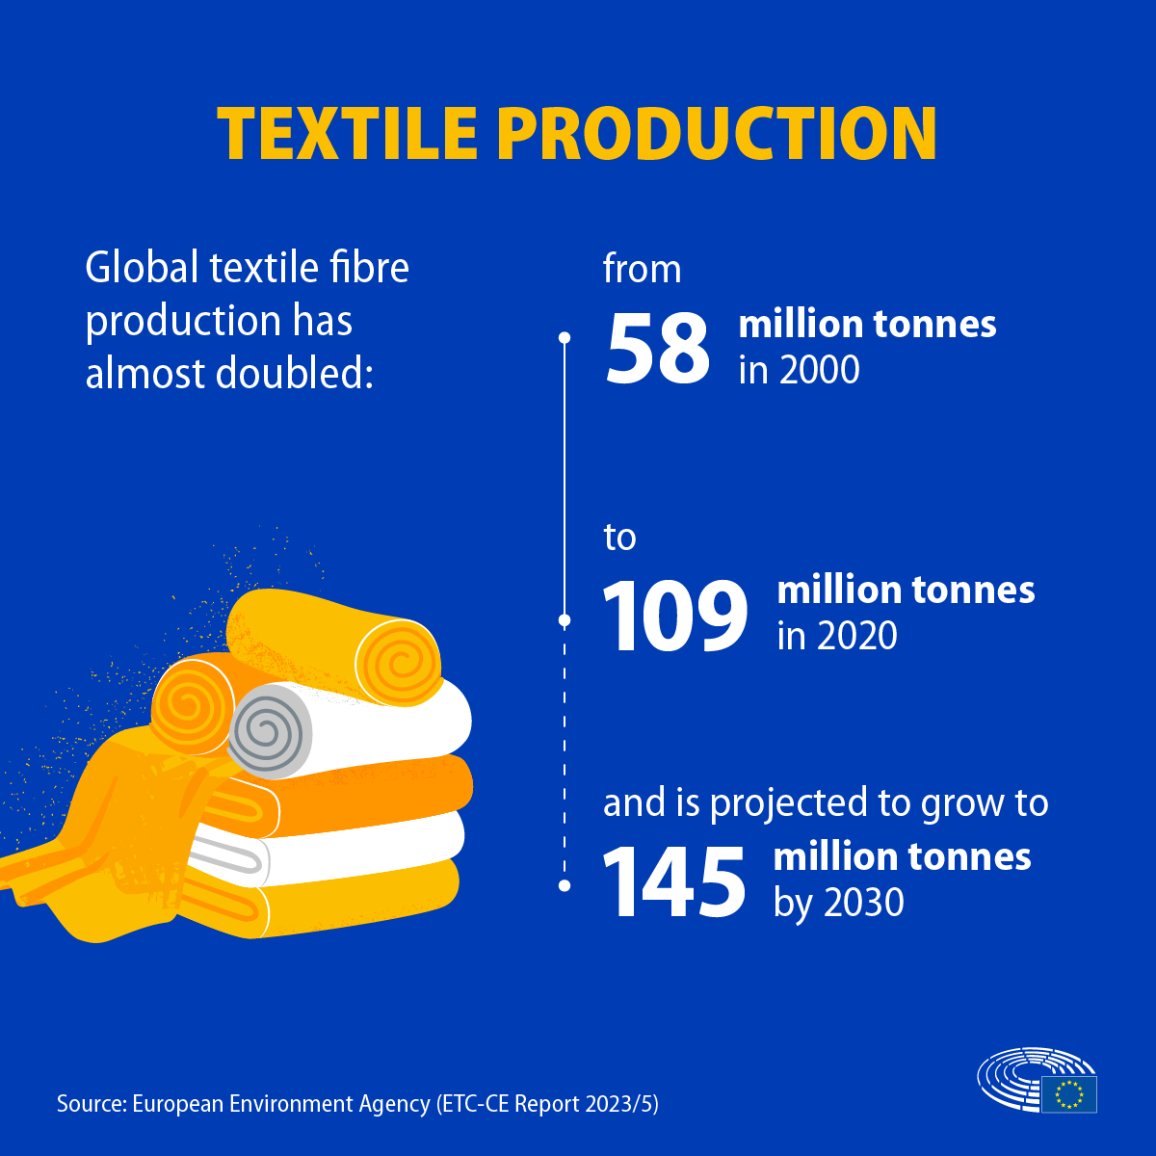 Every thread counts! Today's post sheds light on the daunting impact of textile waste. Learn how our choices in fabric can either burden or benefit our planet. 🌍♻️ 

#TextileWaste #EcoImpact Source: European Parliament